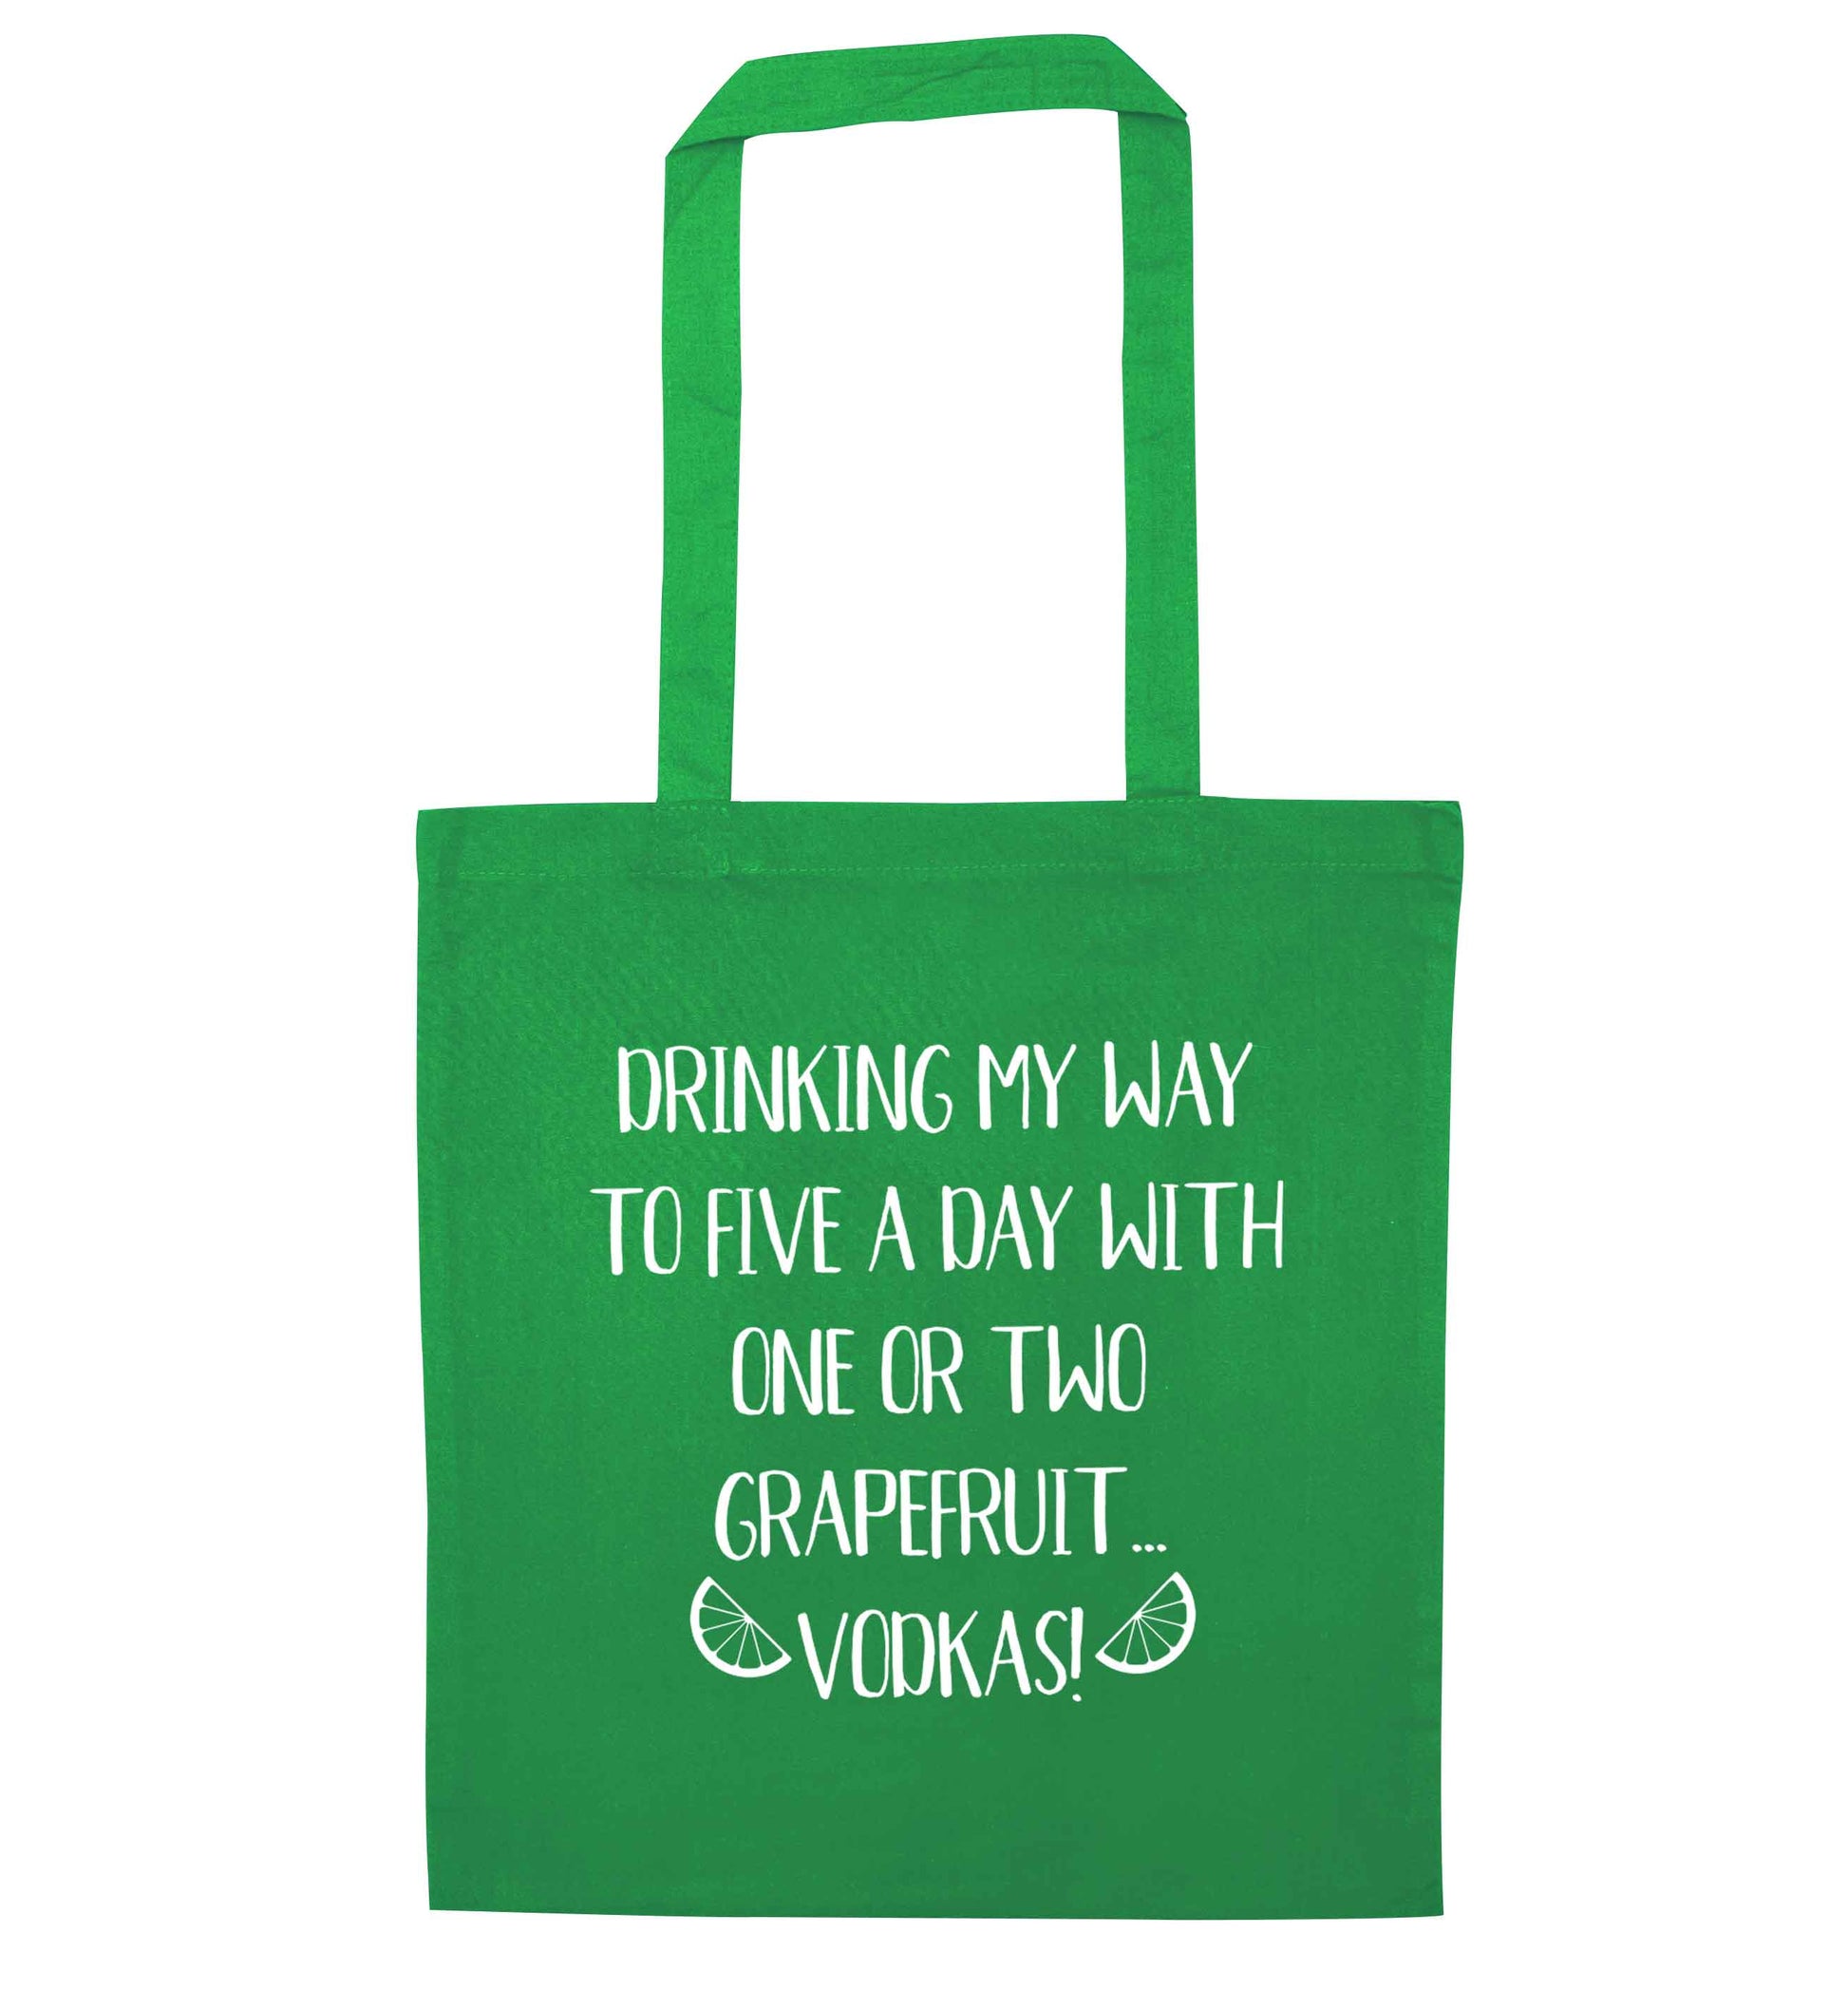 Drinking my way to five a day with one or two grapefruit vodkas green tote bag